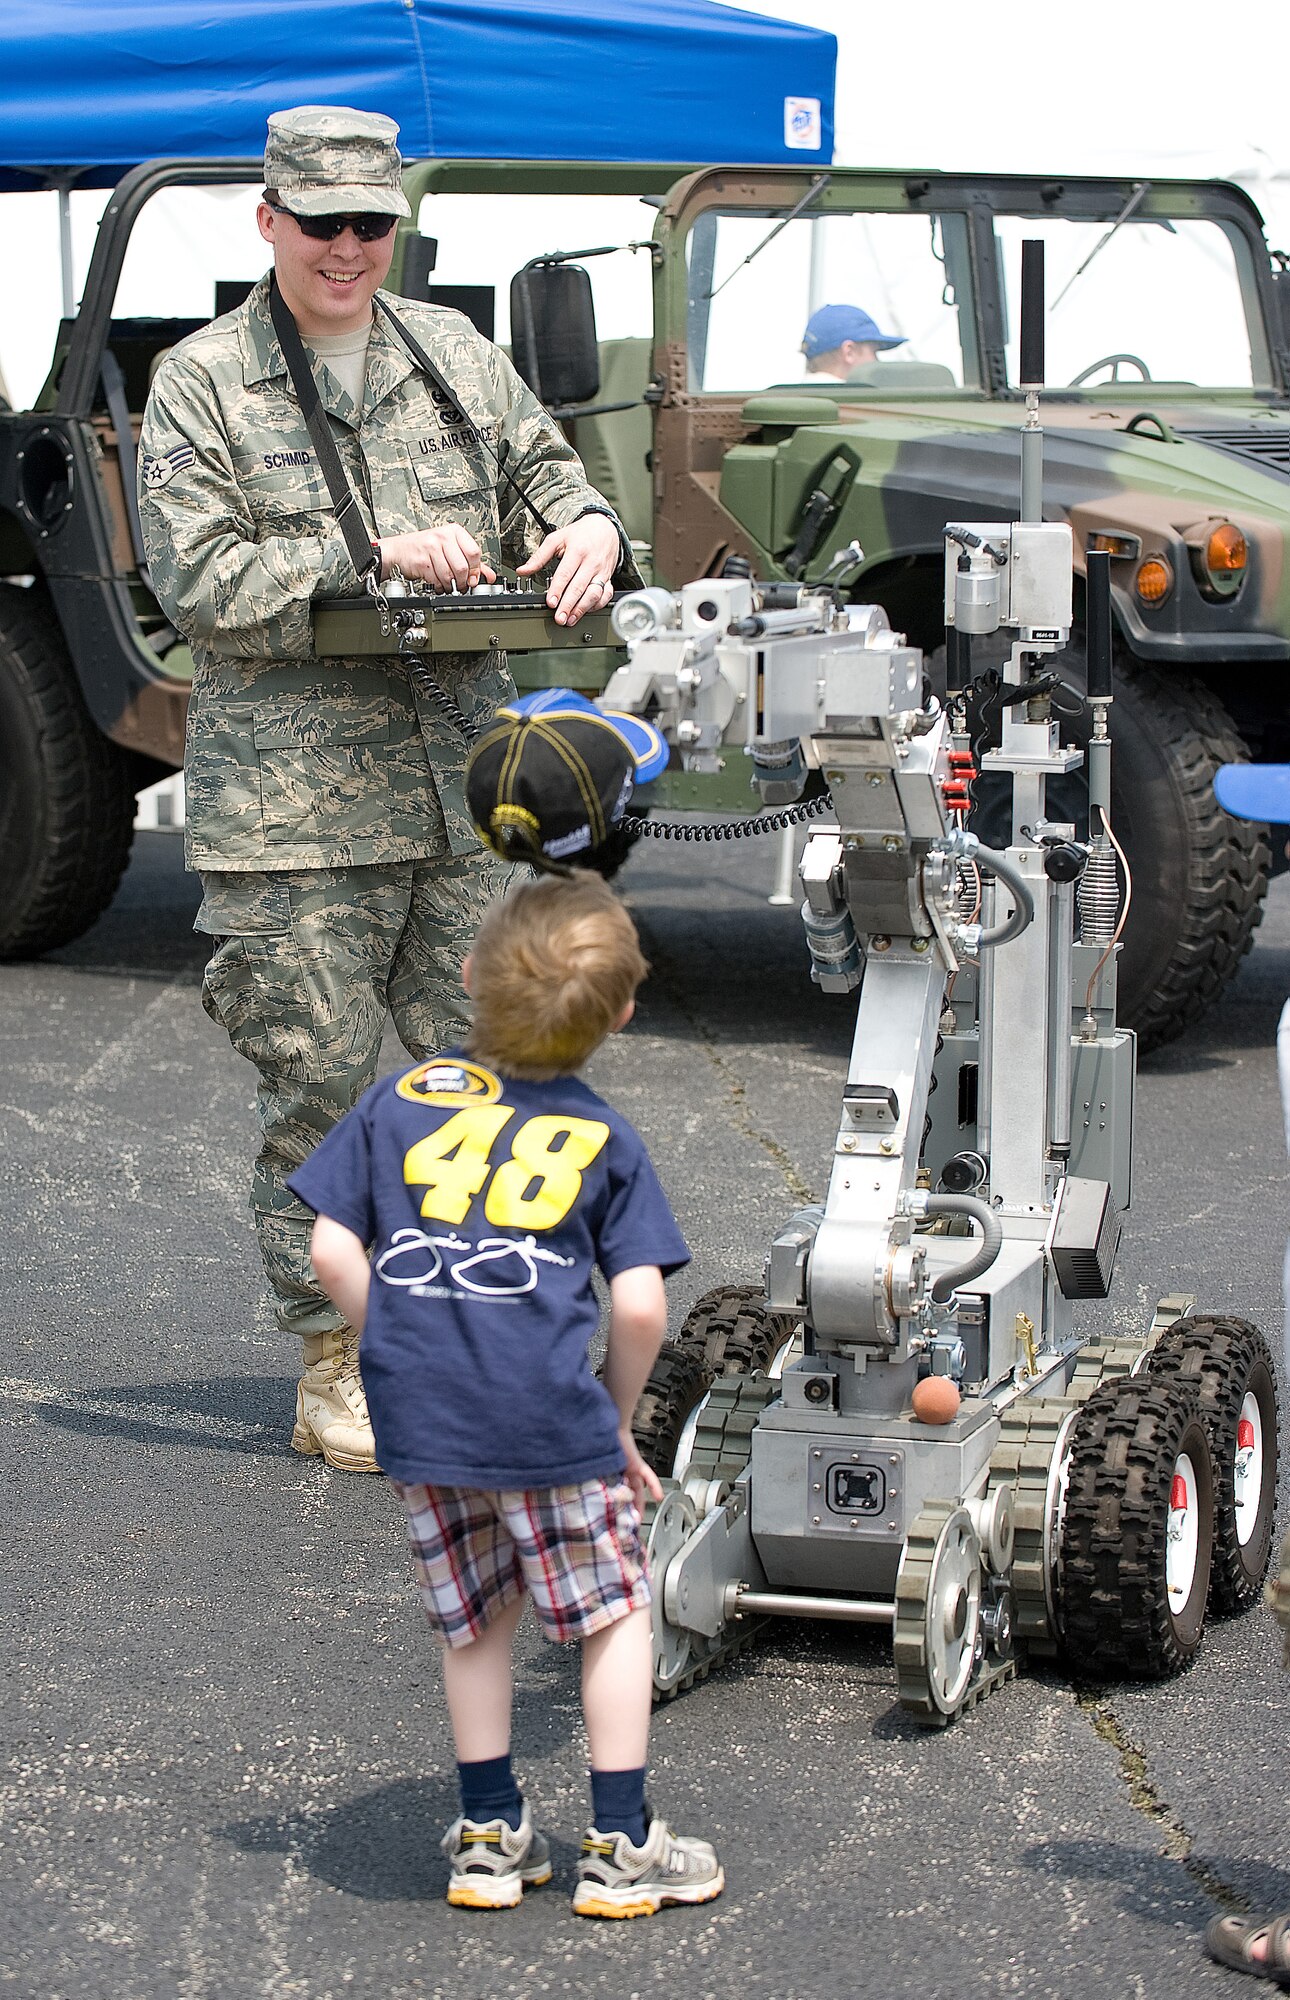 A young Jimmie Johnson fan watches while Senior Airman Robert Schmid, 436th Airlift Wing, demonstrates the capability of a robot used by the explosive ordnance team at Dover Air Force Base, Del. Throughout the May 30-31 NASCAR event, reservists and regular Air Force members from the 512th and 436th AWs participated in various events showcasing some of Team Dover's capabilities at an arena which seats 135,000. (Air Force photo/Jason Minto)